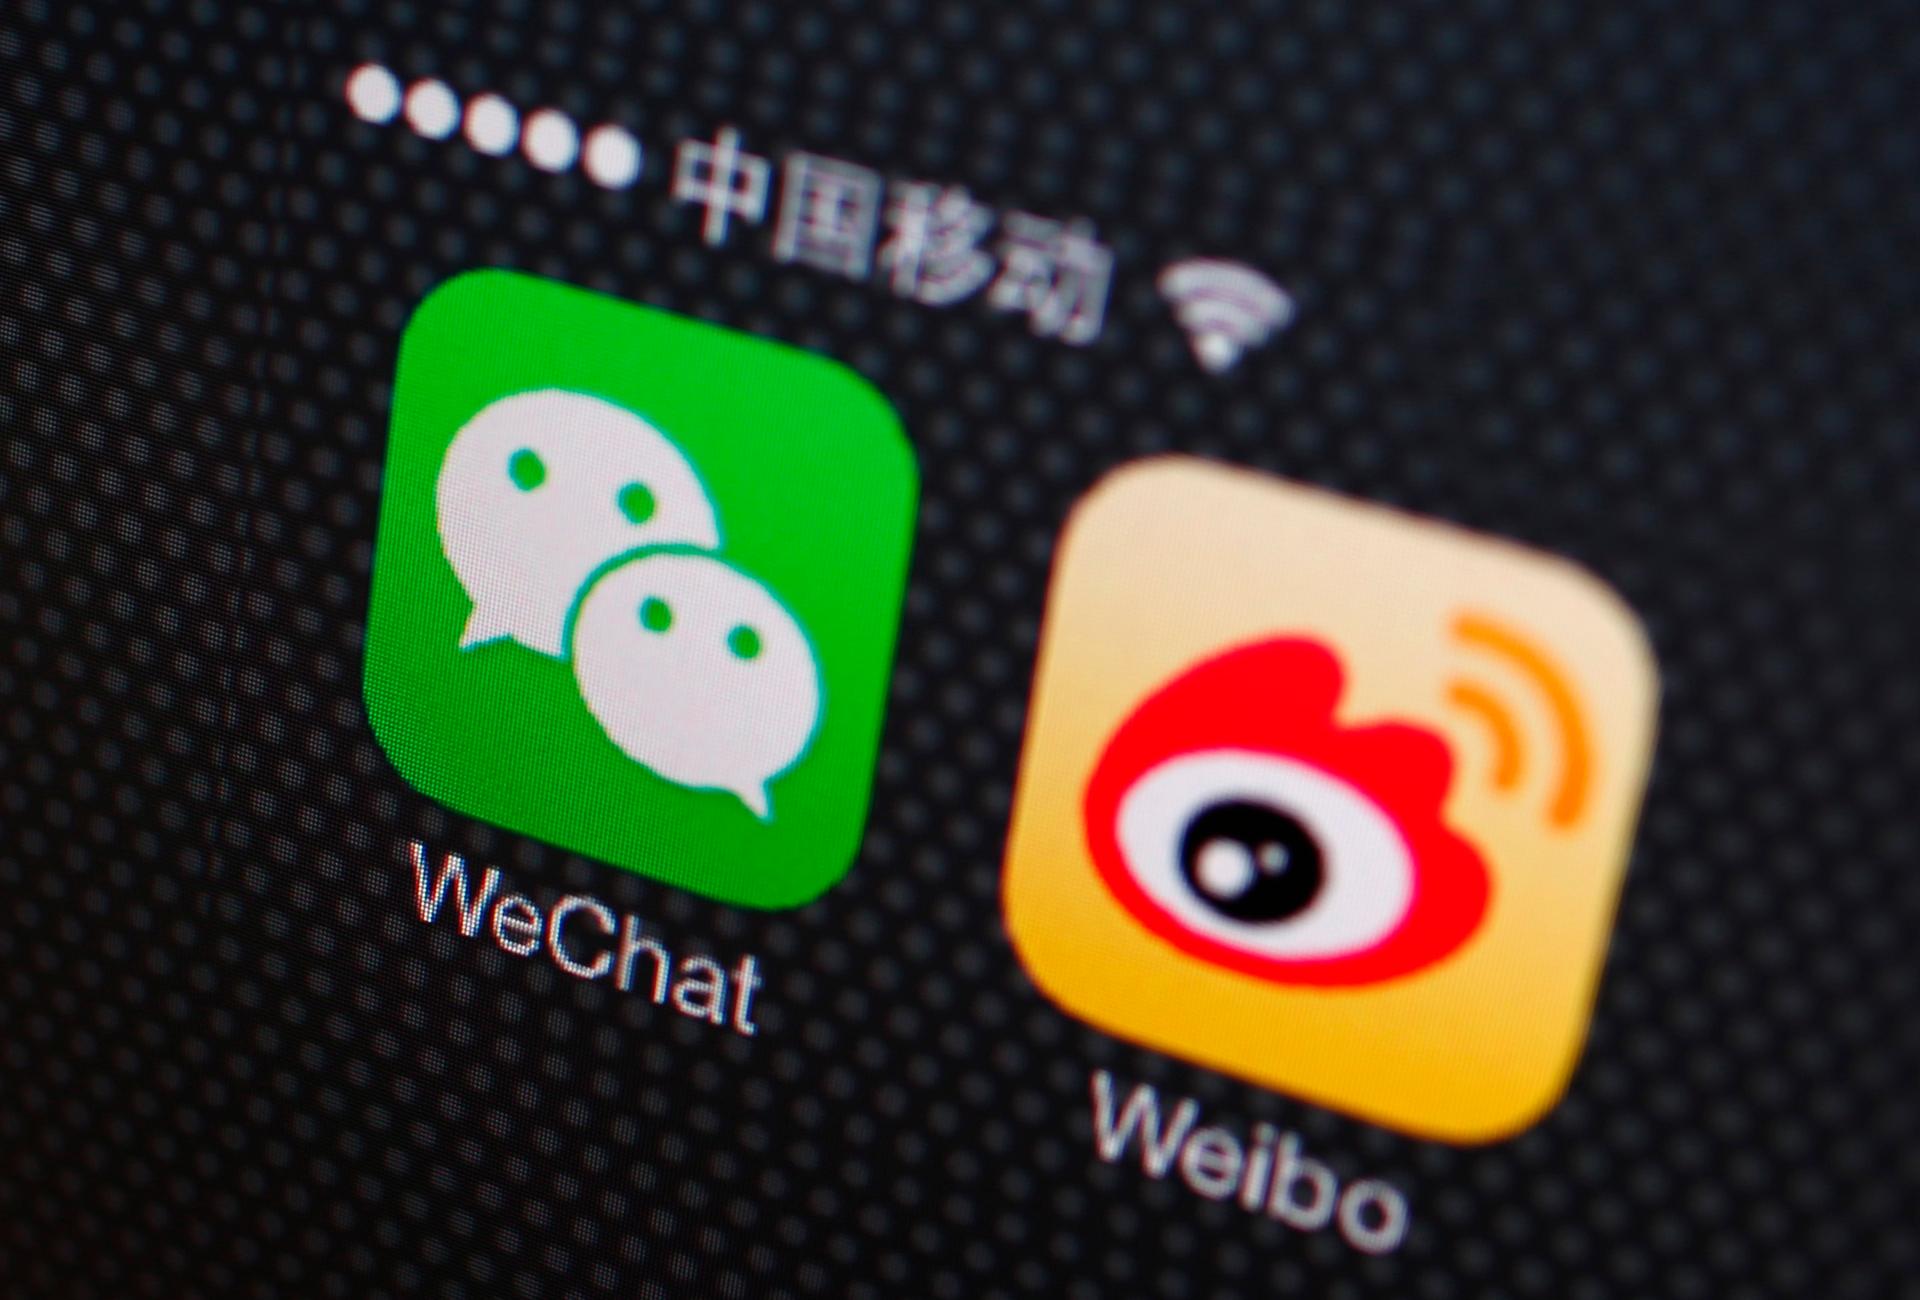 Icons of WeChat and Weibo app in Beijing